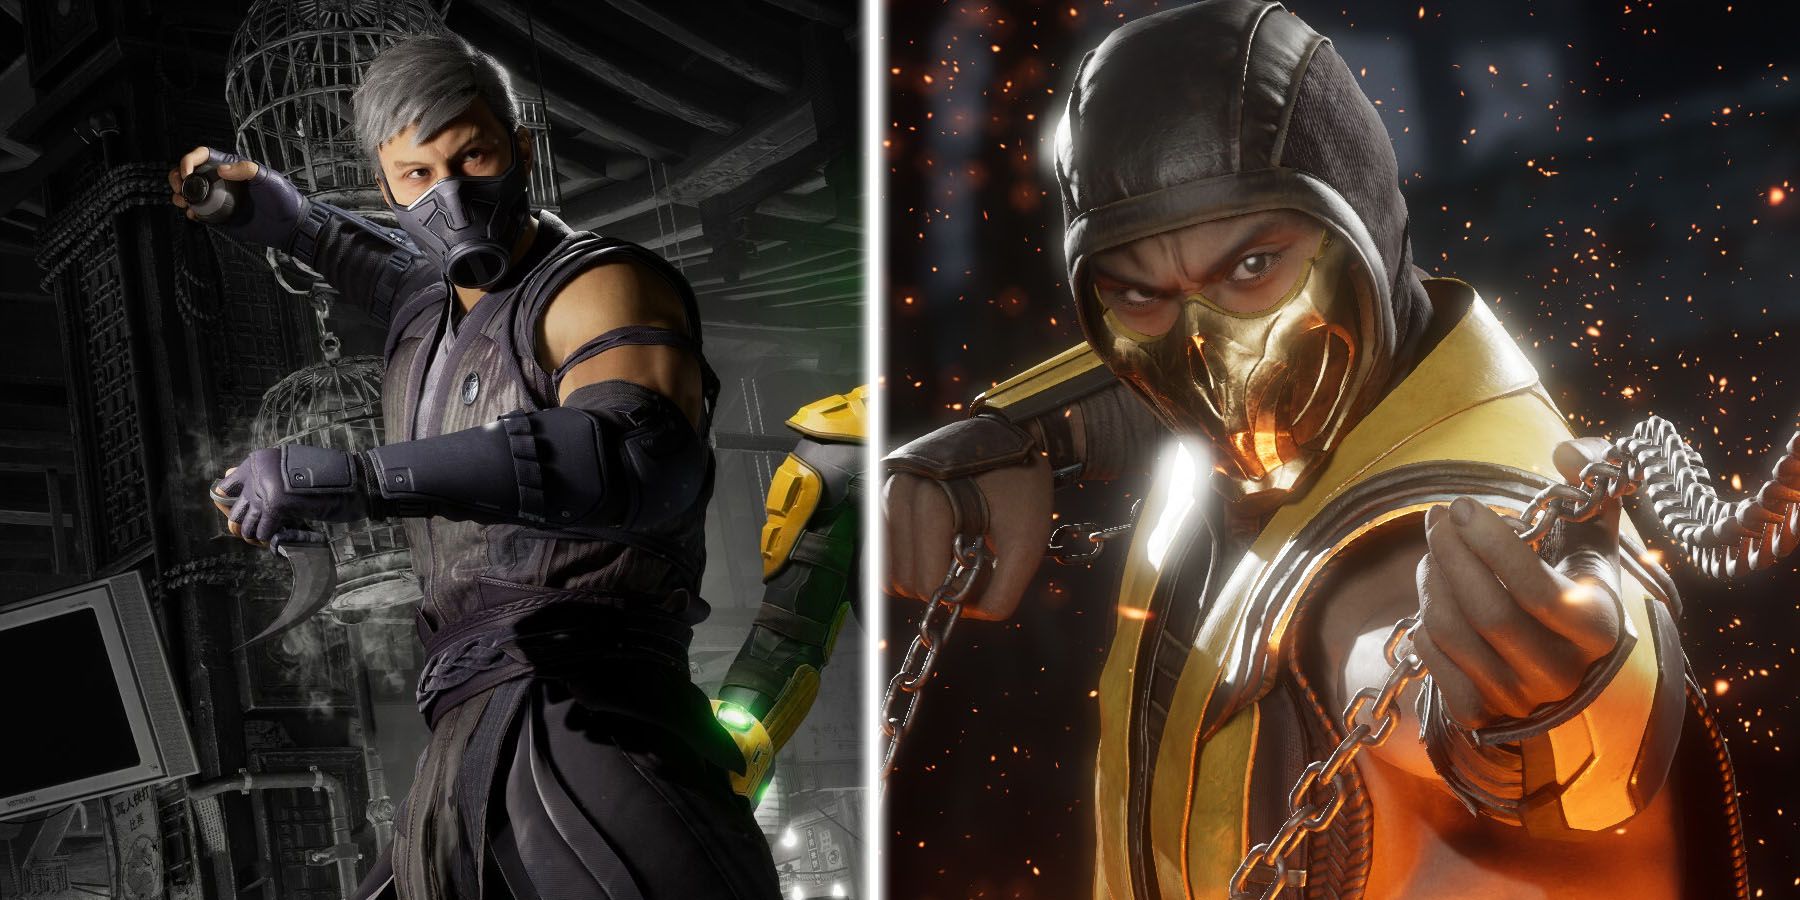 Mortal Kombat 11 Player Count - How Many People Are Playing?